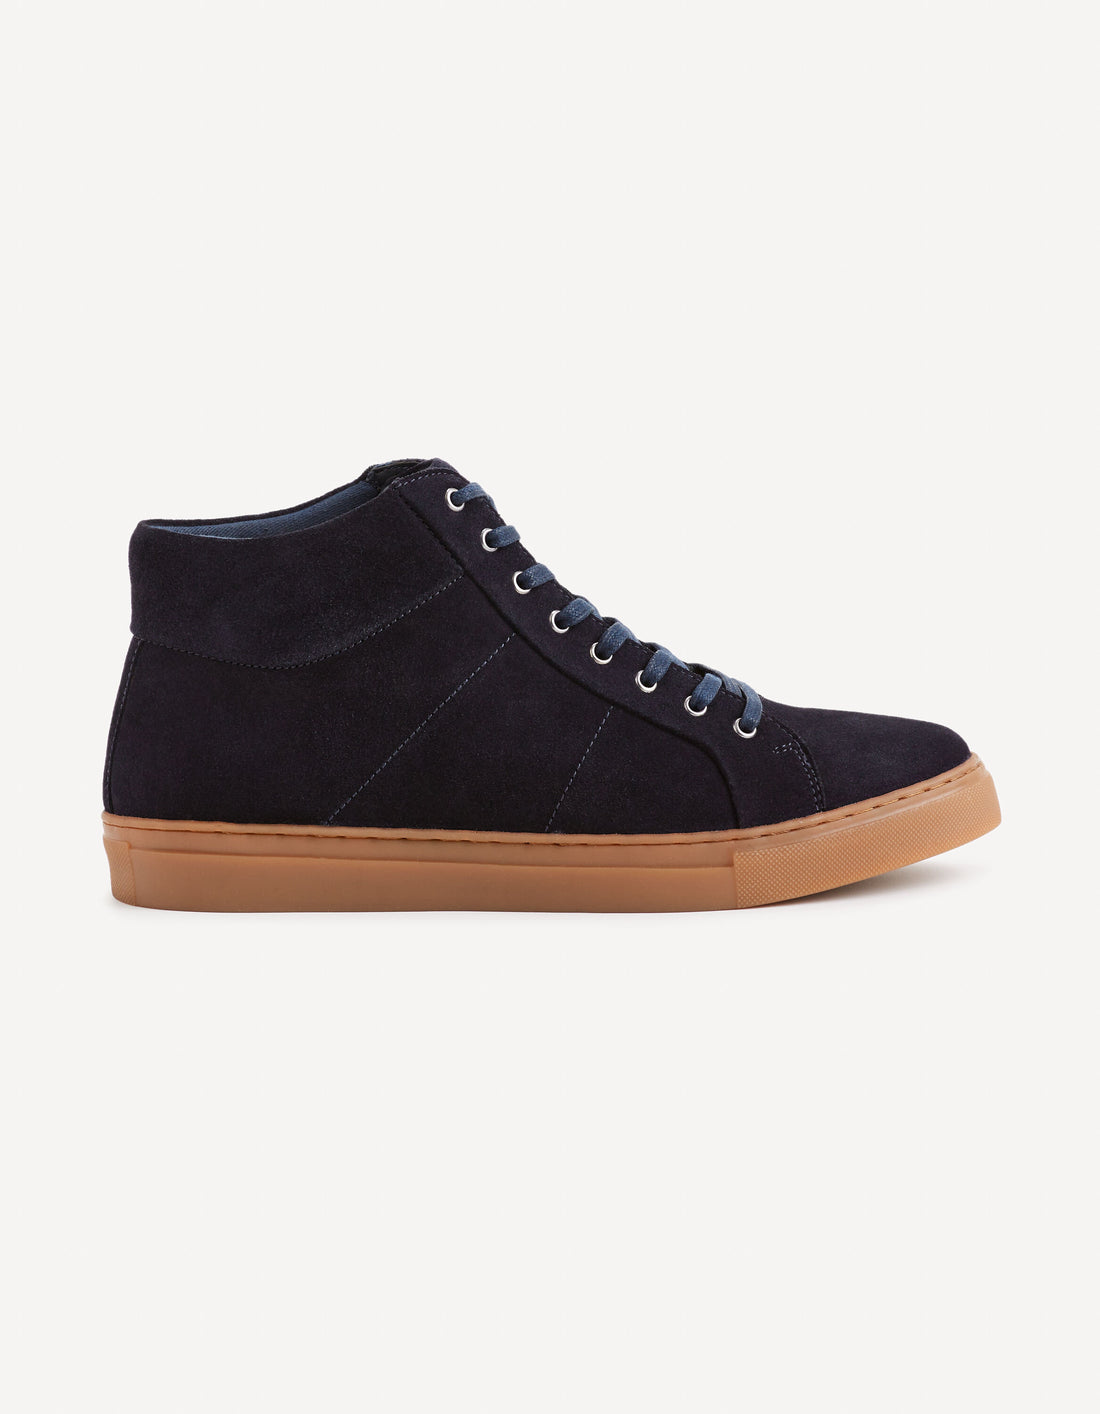 High-Top Leather Shoes - Navy Blue_FYSKATER_NAVY_01